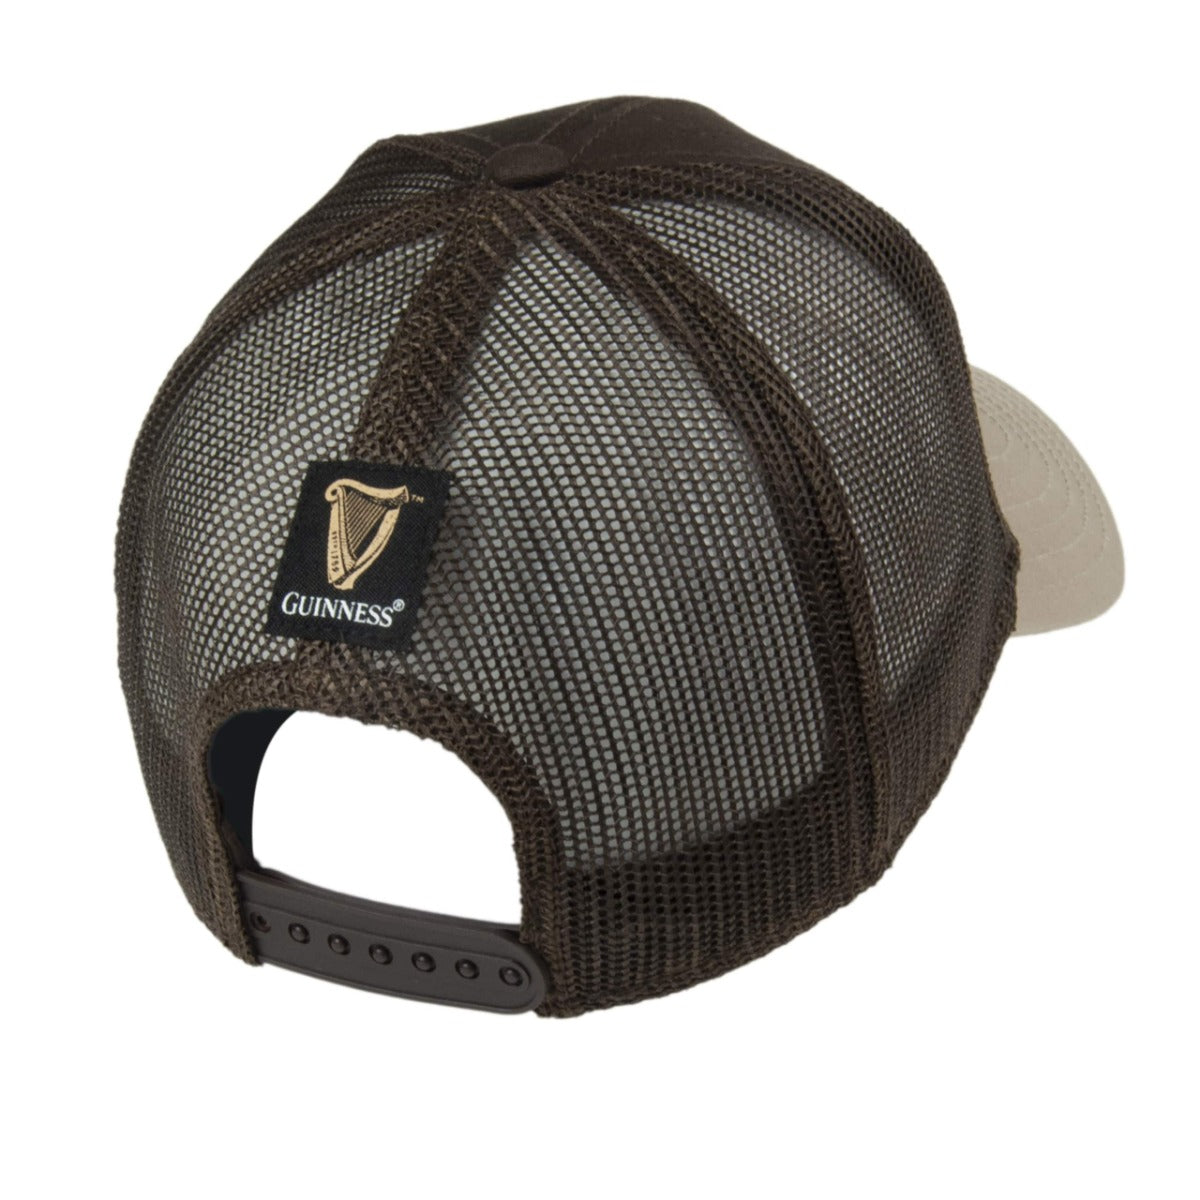 Guinness Trucker Premium Brown with Embroidered Patch Cap